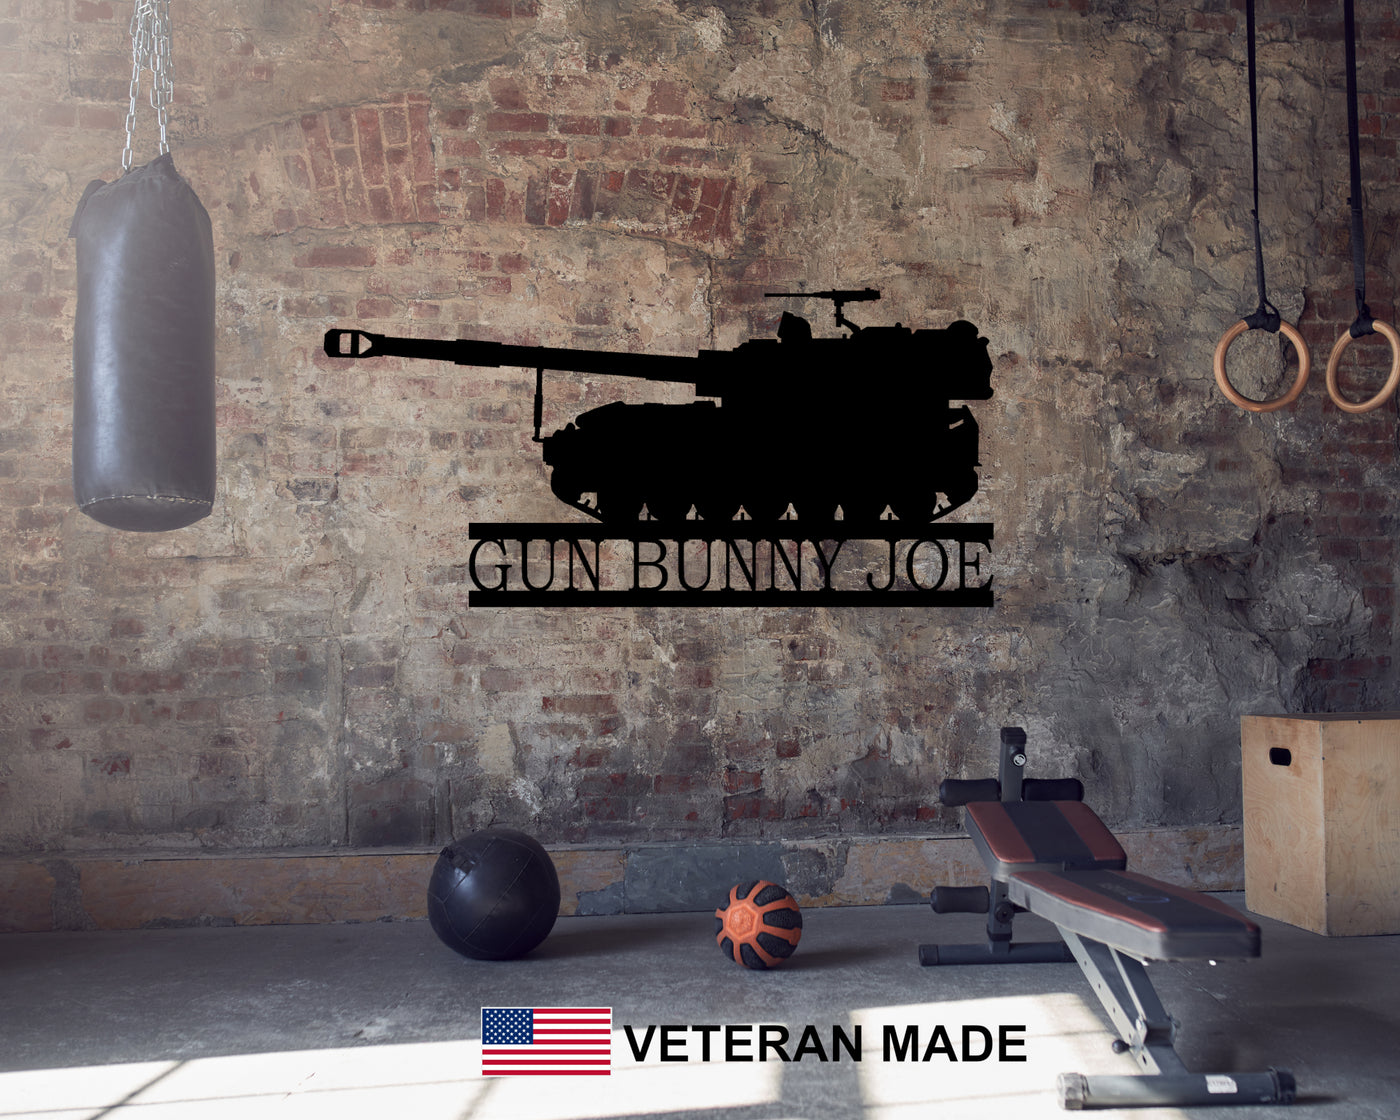 Personalized M109 Howitzer Tank Metal Sign - Madison Iron and Wood - Personalized sign - metal outdoor decor - Steel deocrations - american made products - veteran owned business products - fencing decorations - fencing supplies - custom wall decorations - personalized wall signs - steel - decorative post caps - steel post caps - metal post caps - brackets - structural brackets - home improvement - easter - easter decorations - easter gift - easter yard decor